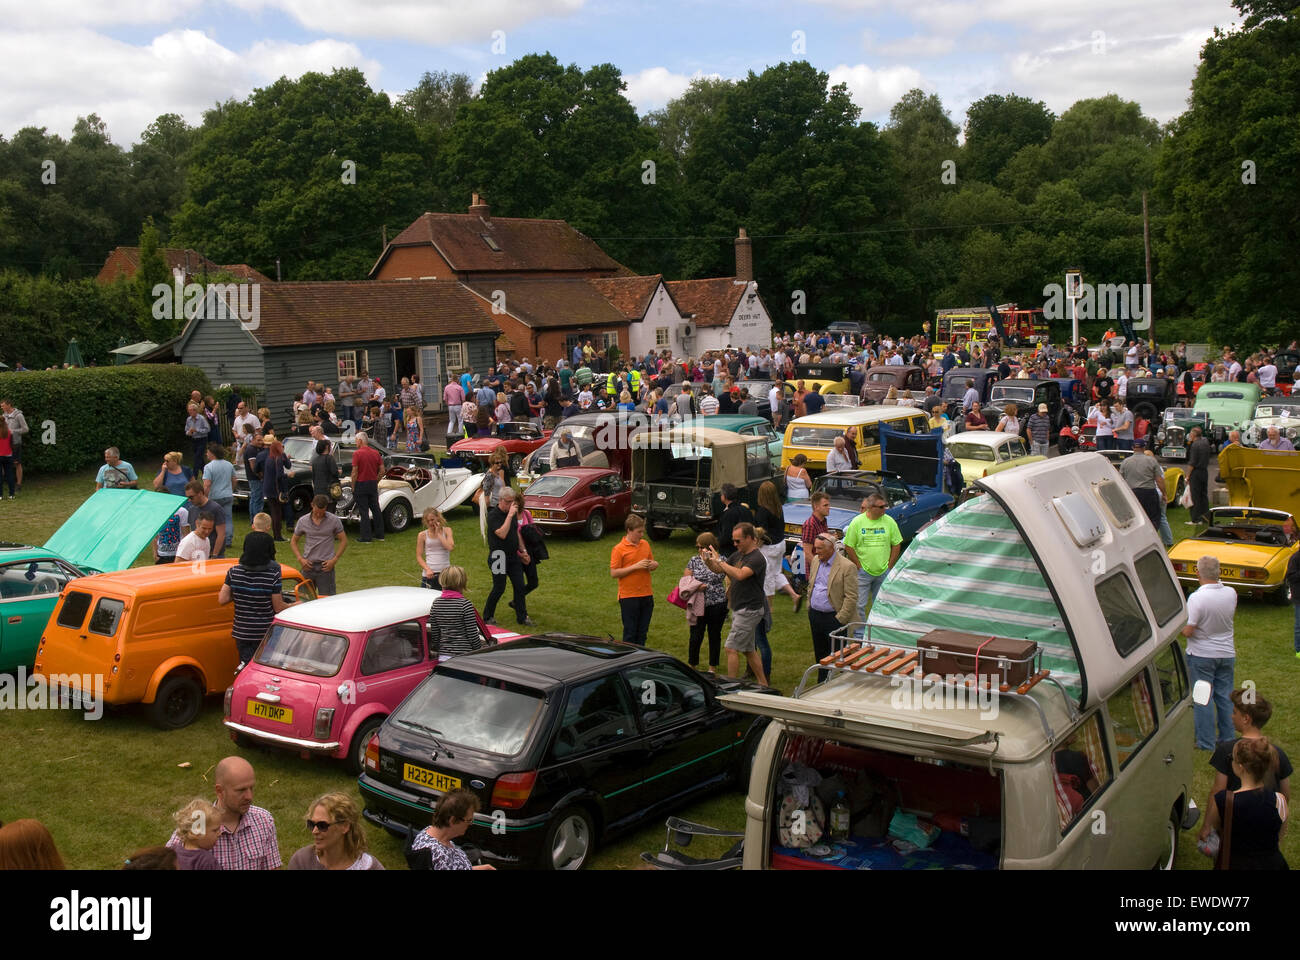 Crowds gathered at a Classic Car Show, Liphook, Hampshire, UK. Stock Photo